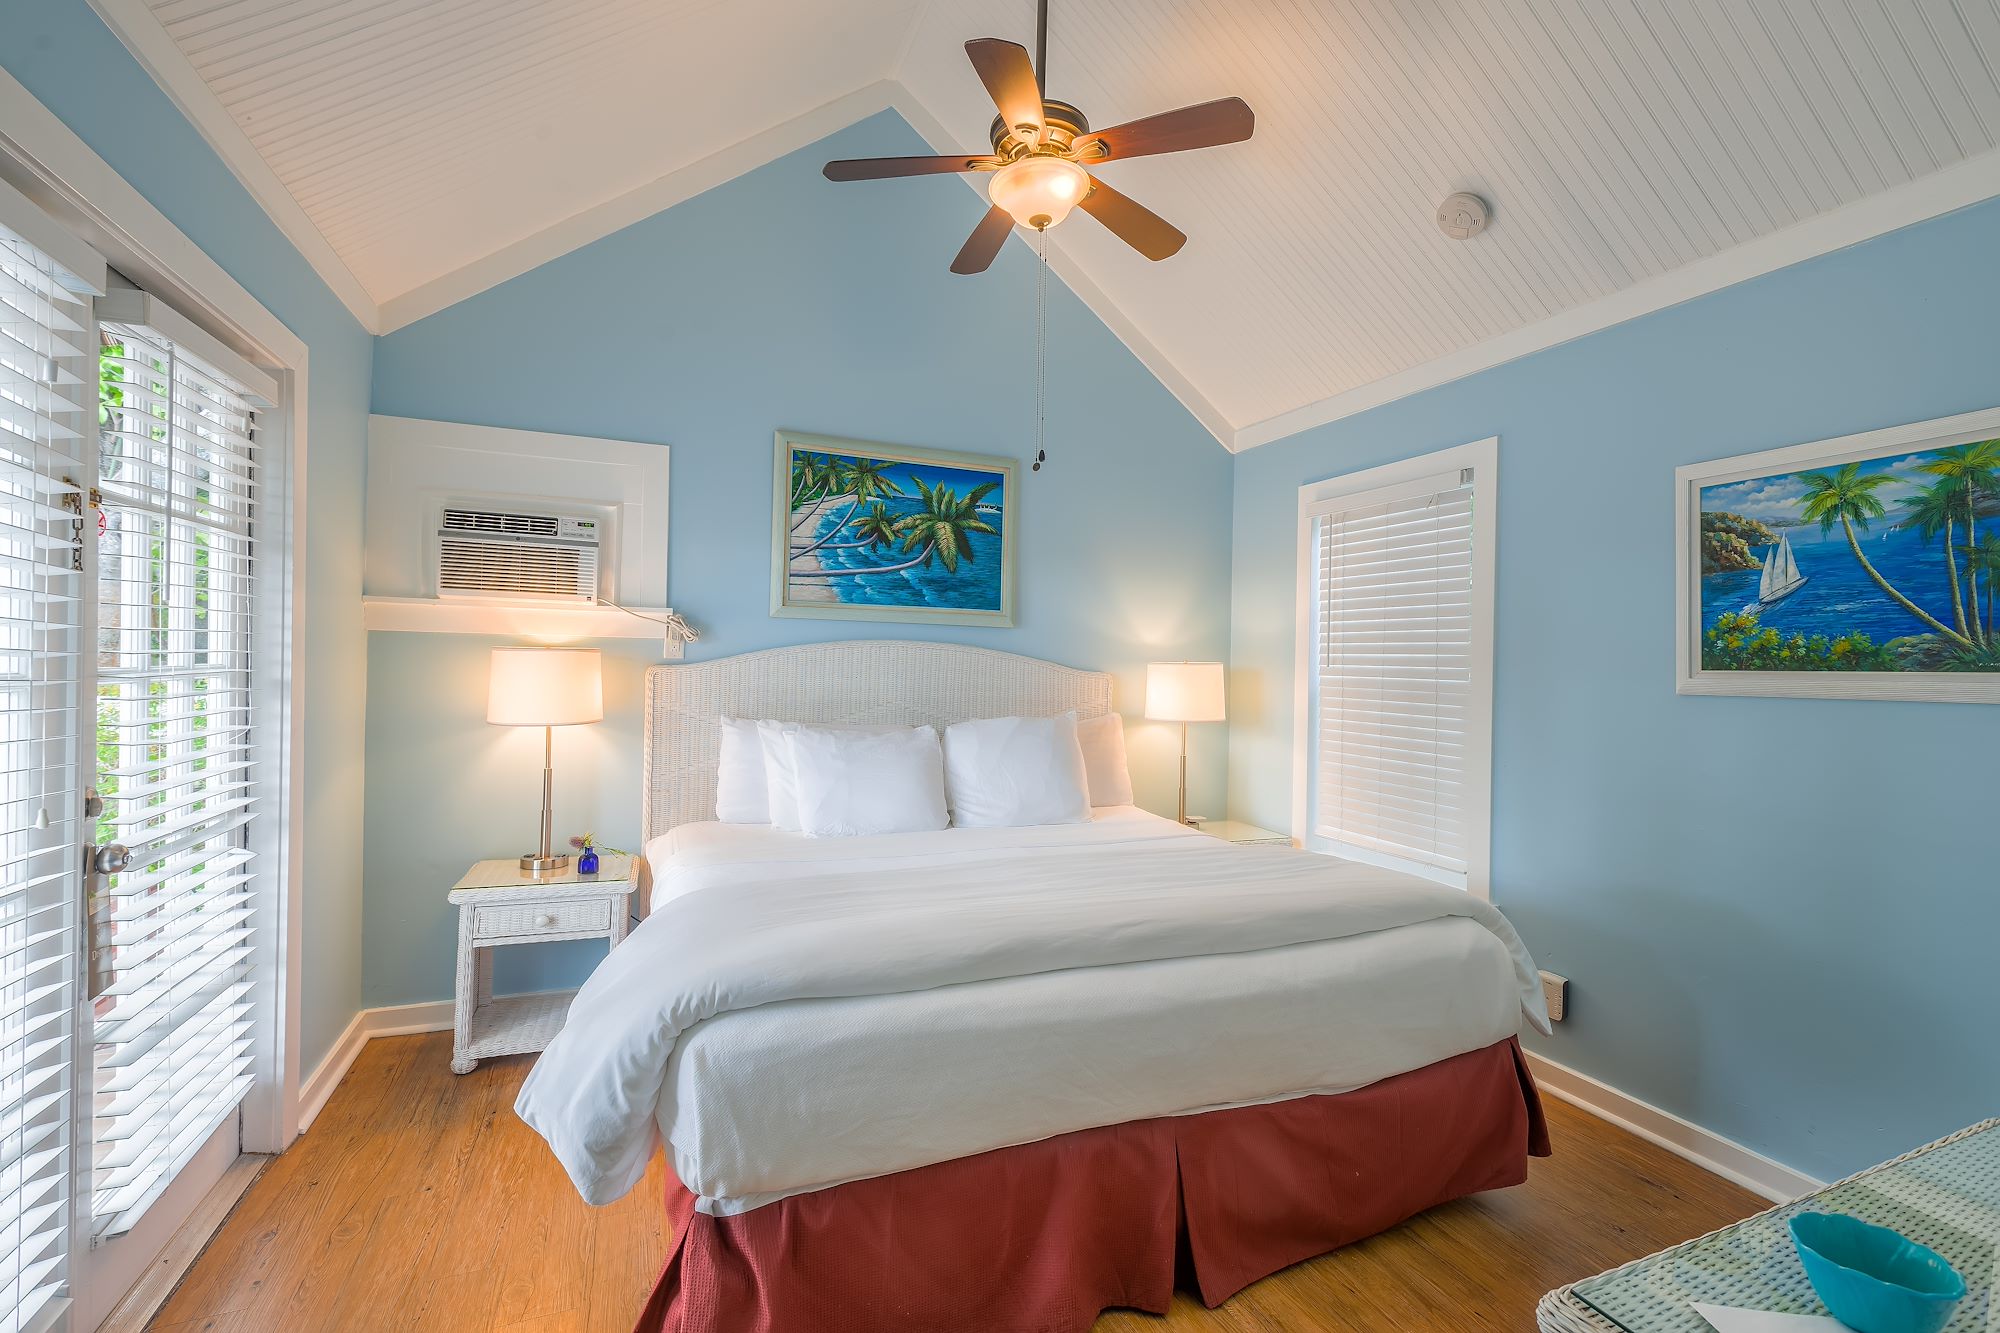 Our Deluxe King Room with Patio in Key West